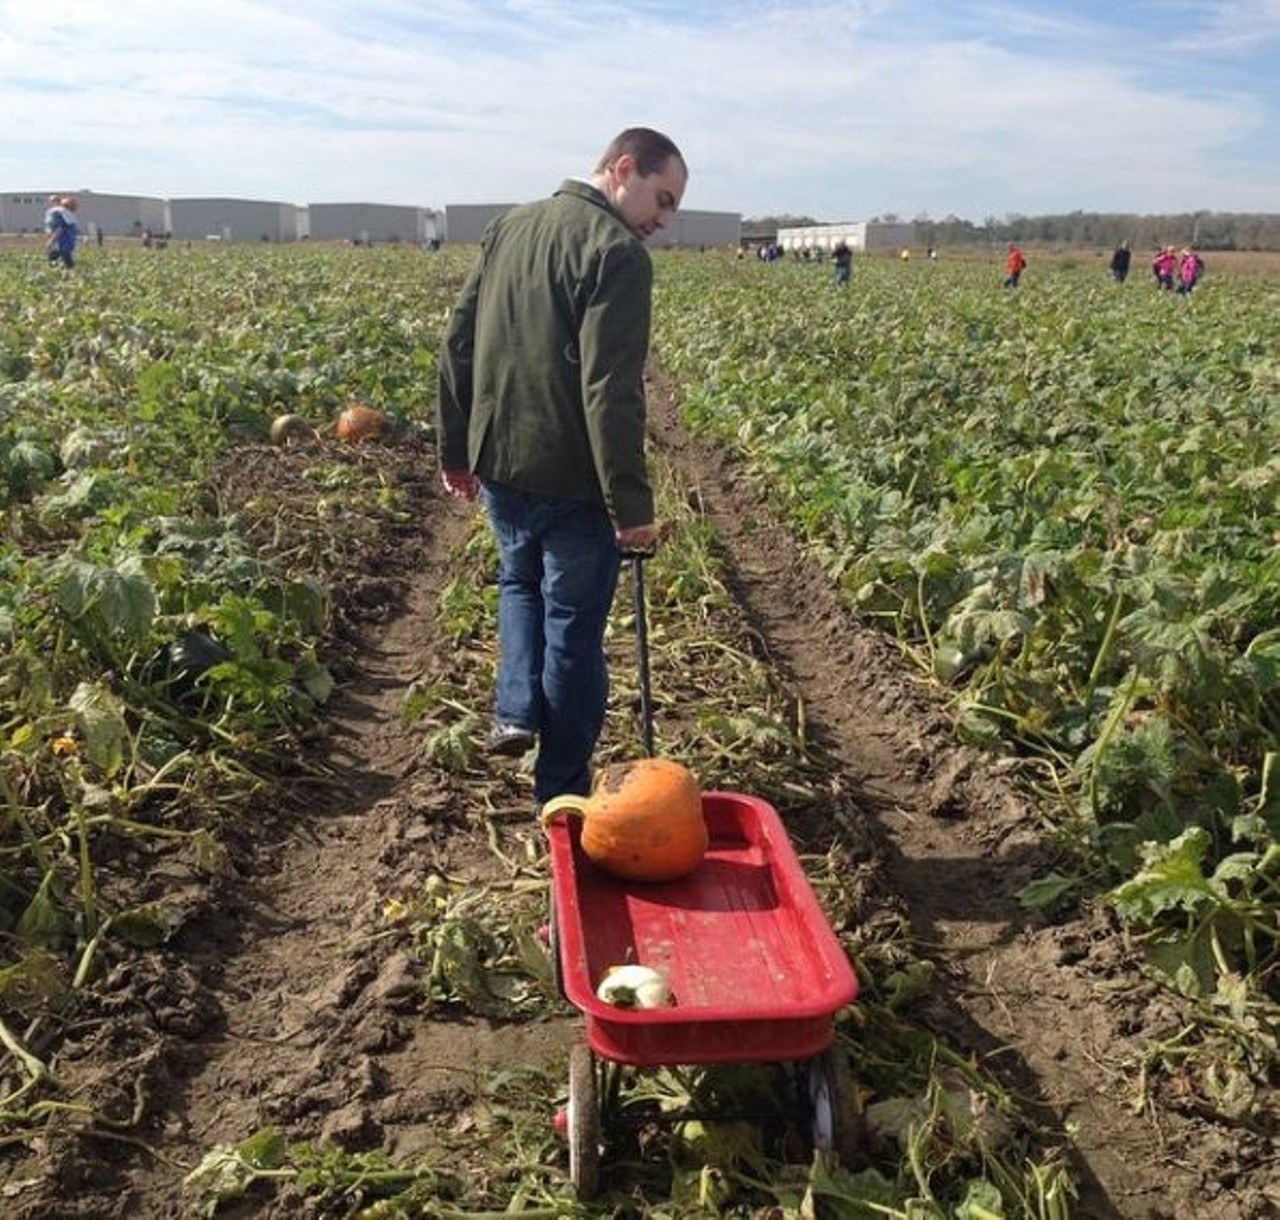 Thies Farm and Greenhouses
Locations in St. Louis and St. Charles
Pumpkins are such a big deal at Thies Farm that the farm is devoted to "Pumpkinland" each October, with mazes, food and more. Thies Farm has lots of homegrown produce available in addition to the pumpkin patch. Photo courtesy of Instagram / lindacsnr.